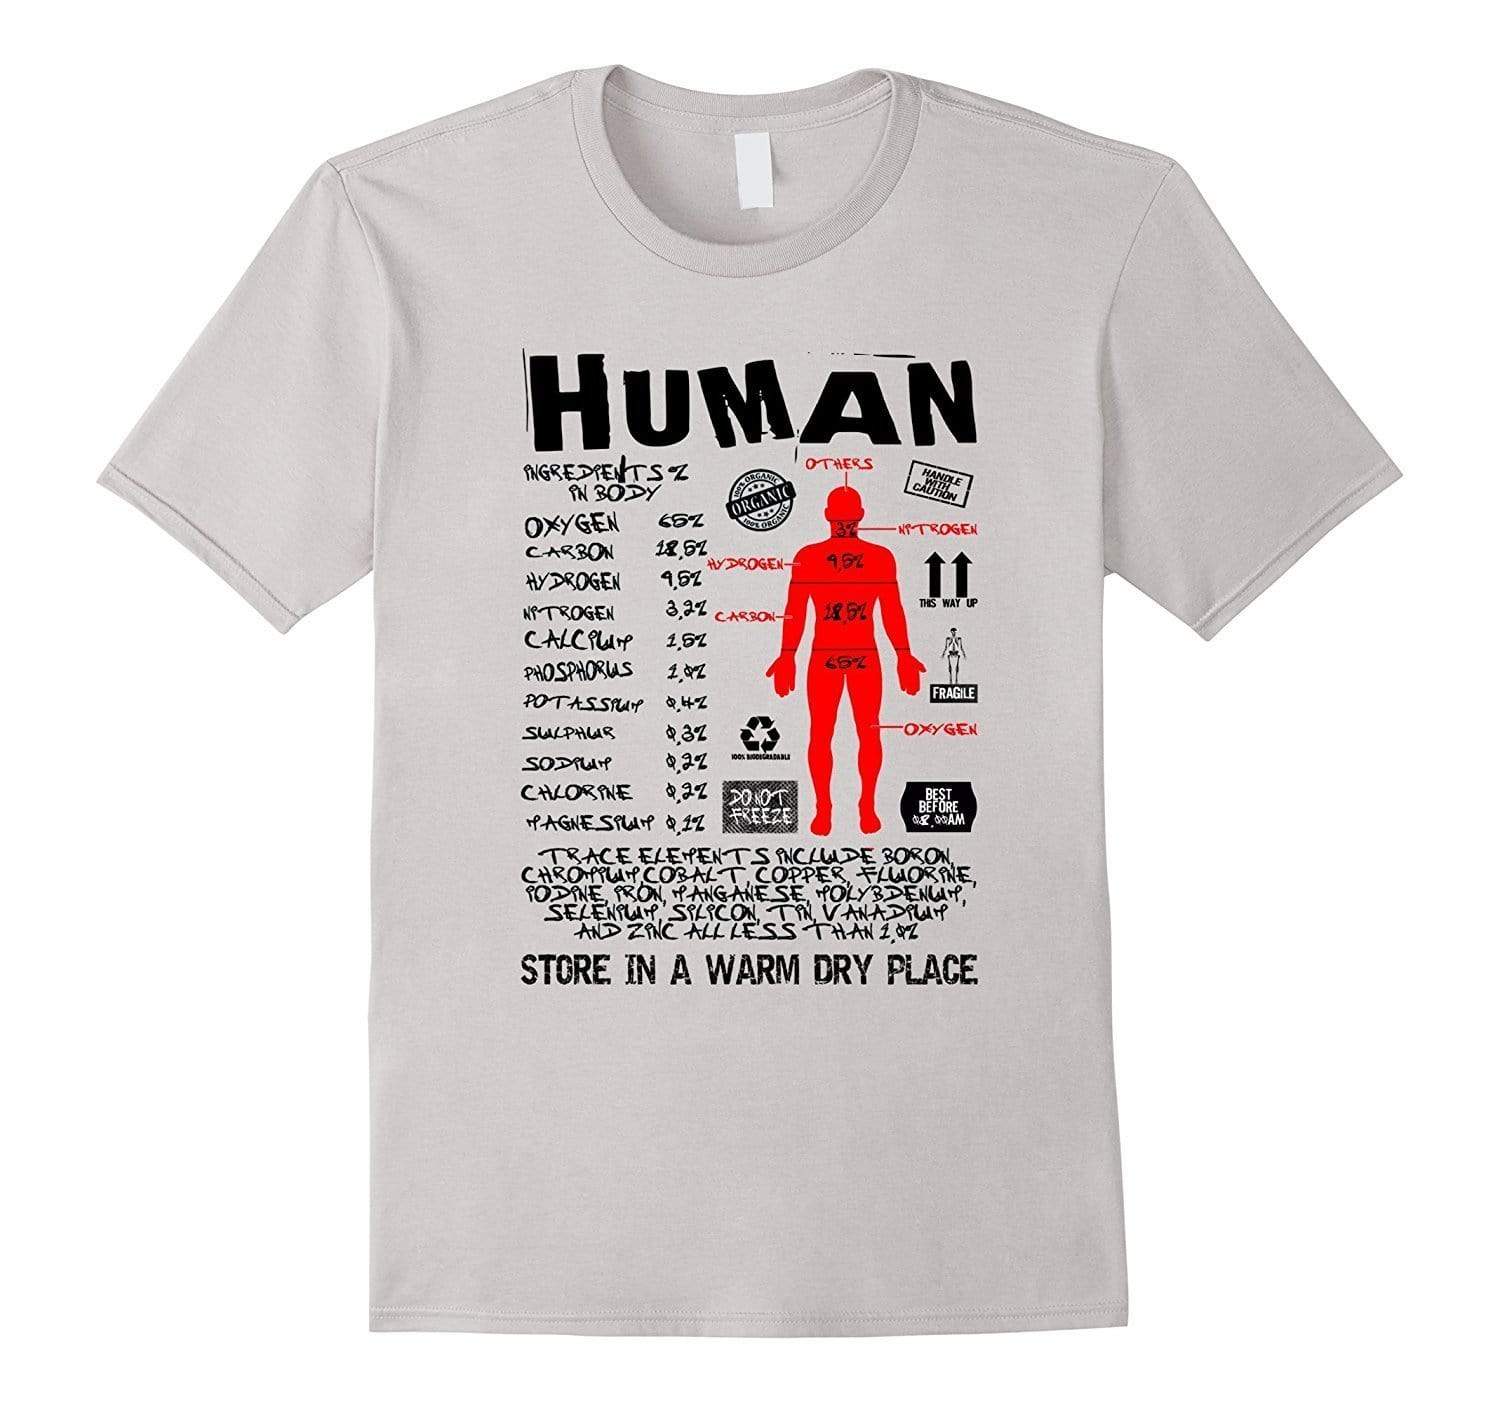 T-Shirt "Human Ingredients" T-Shirt - 100% Cotton The Sexy Scientist